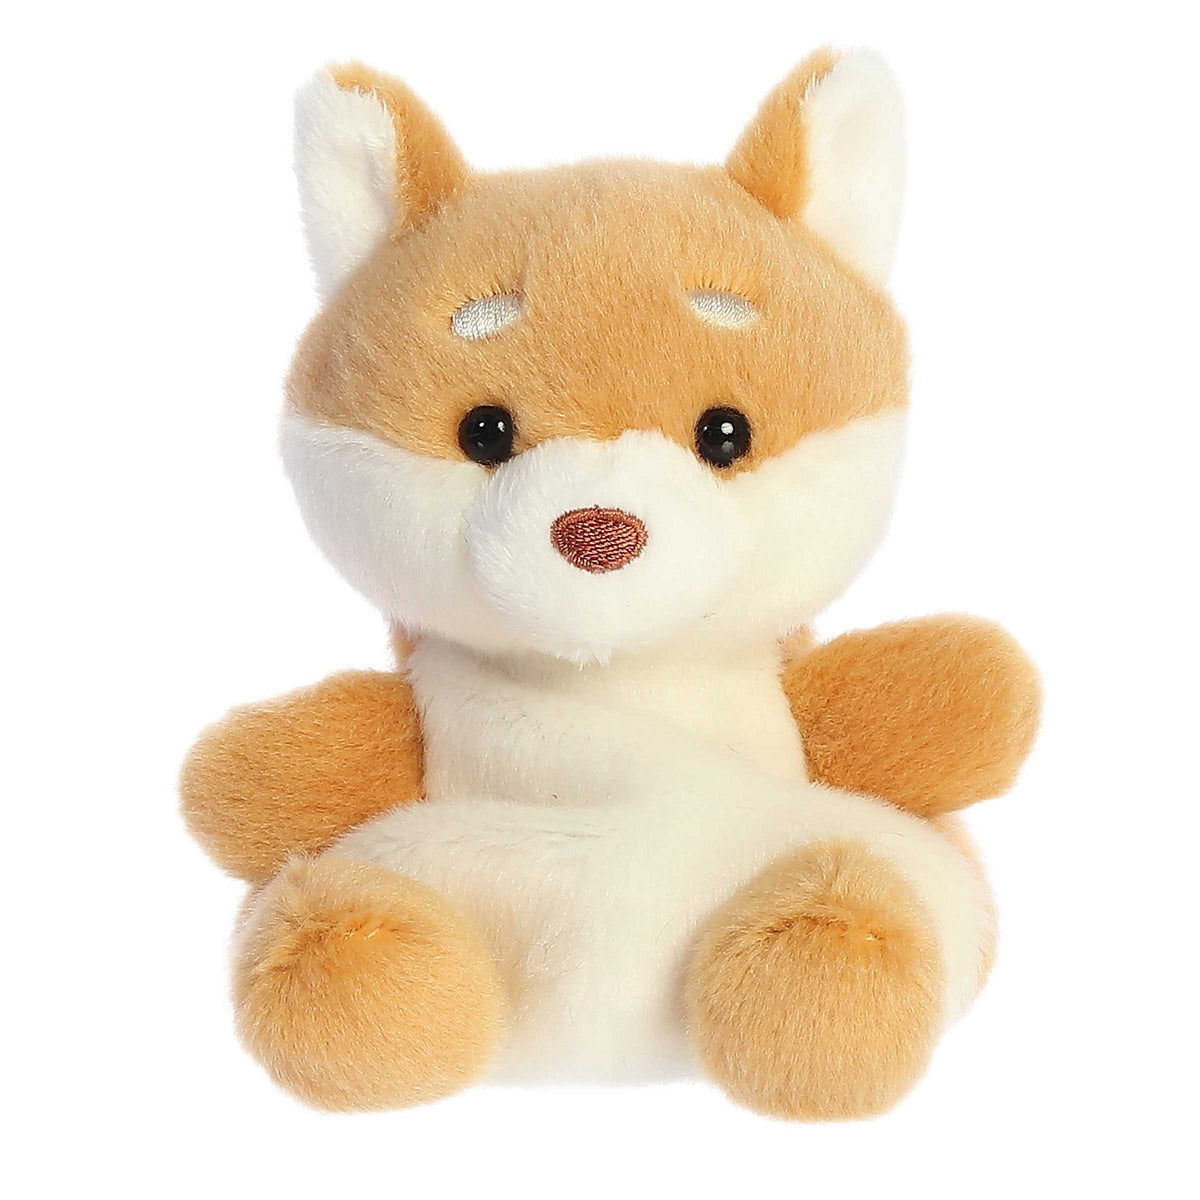 Tiny Keiko Shiba Inu Stuffed animals plush dog with brown and white soft fur body, dark brown nose and white accents over eyes